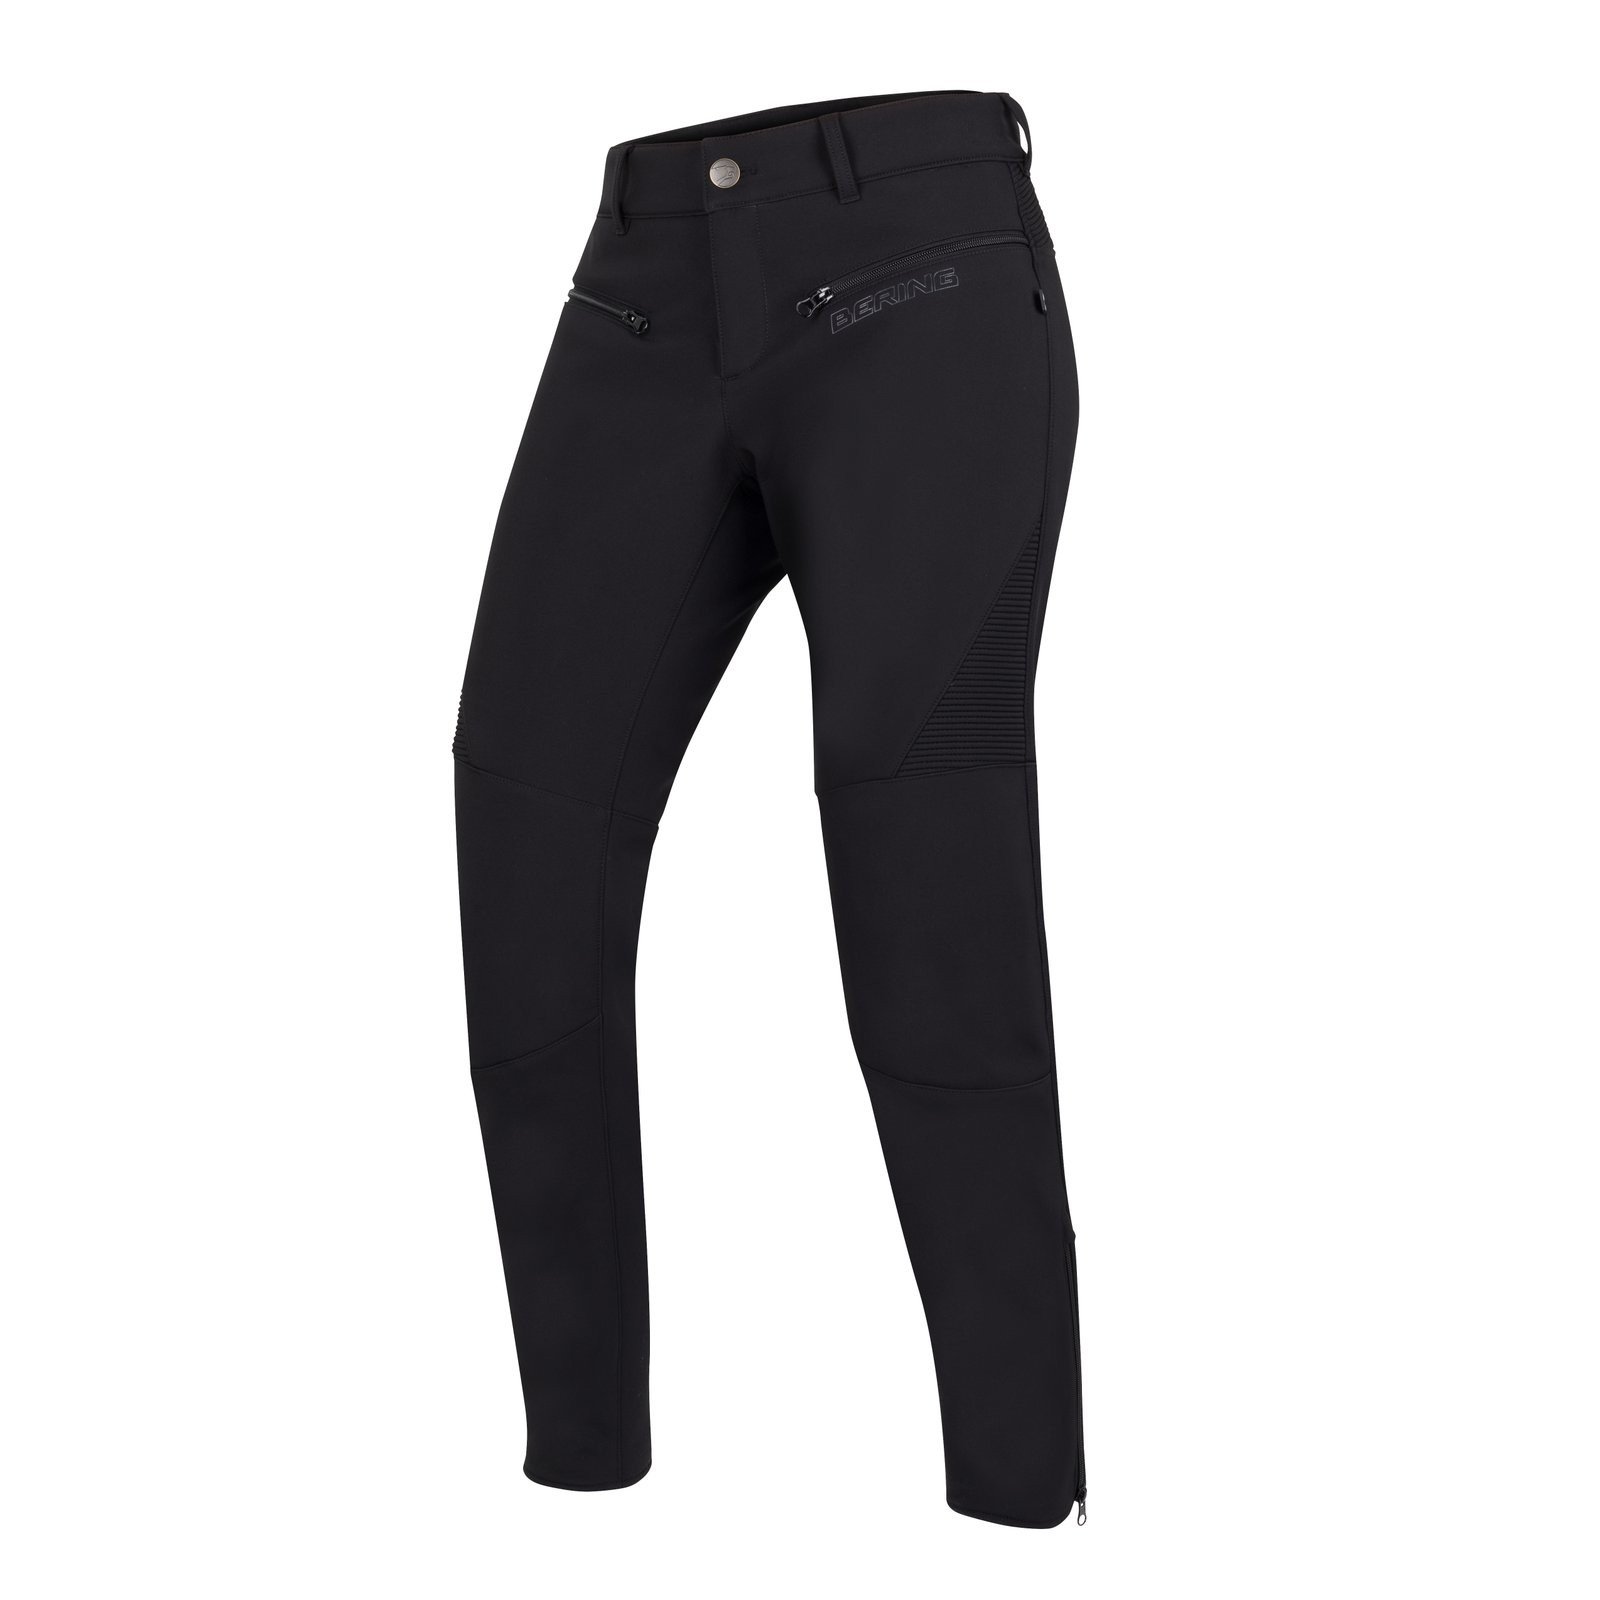 Image of Bering Lady Alkor Trousers Black Size T5 ID 3660815150863